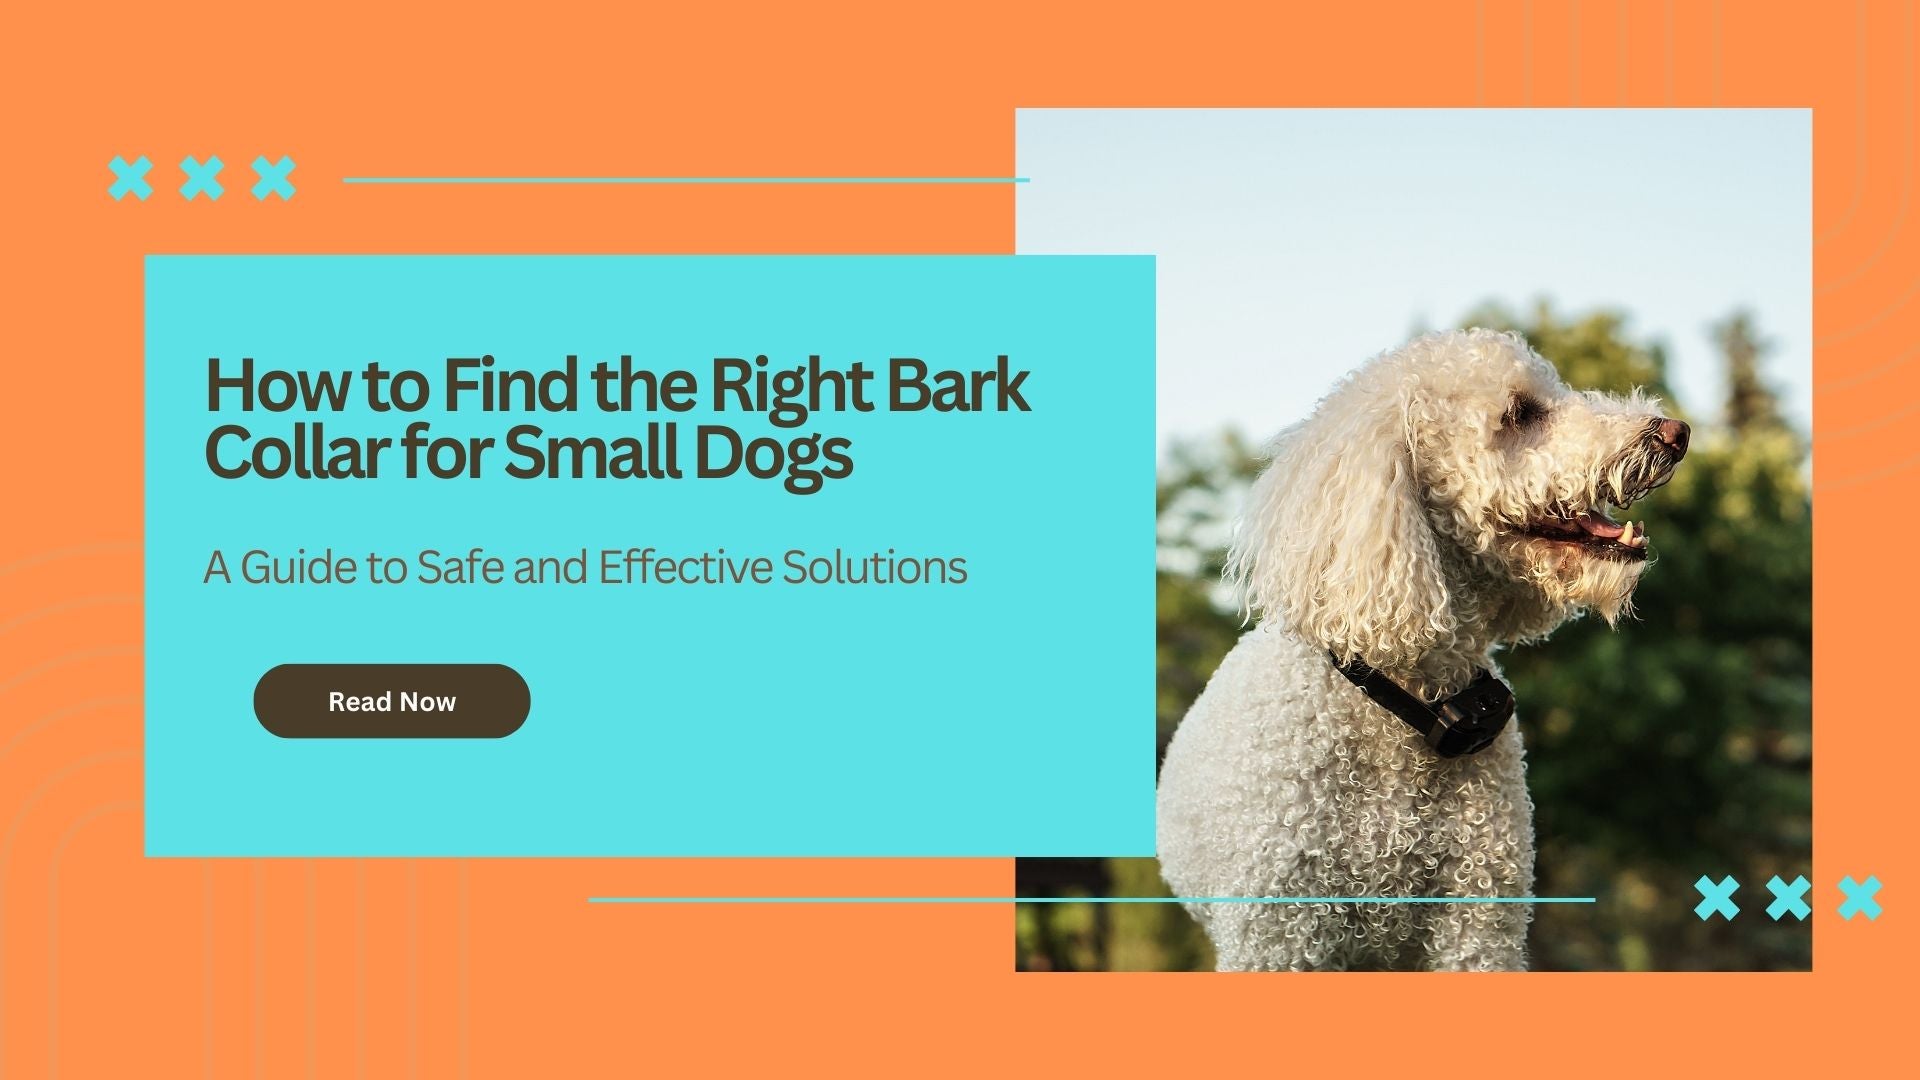 How to Find the Right Bark Collar for Small Dogs: A Guide to Safe and Effective Solutions